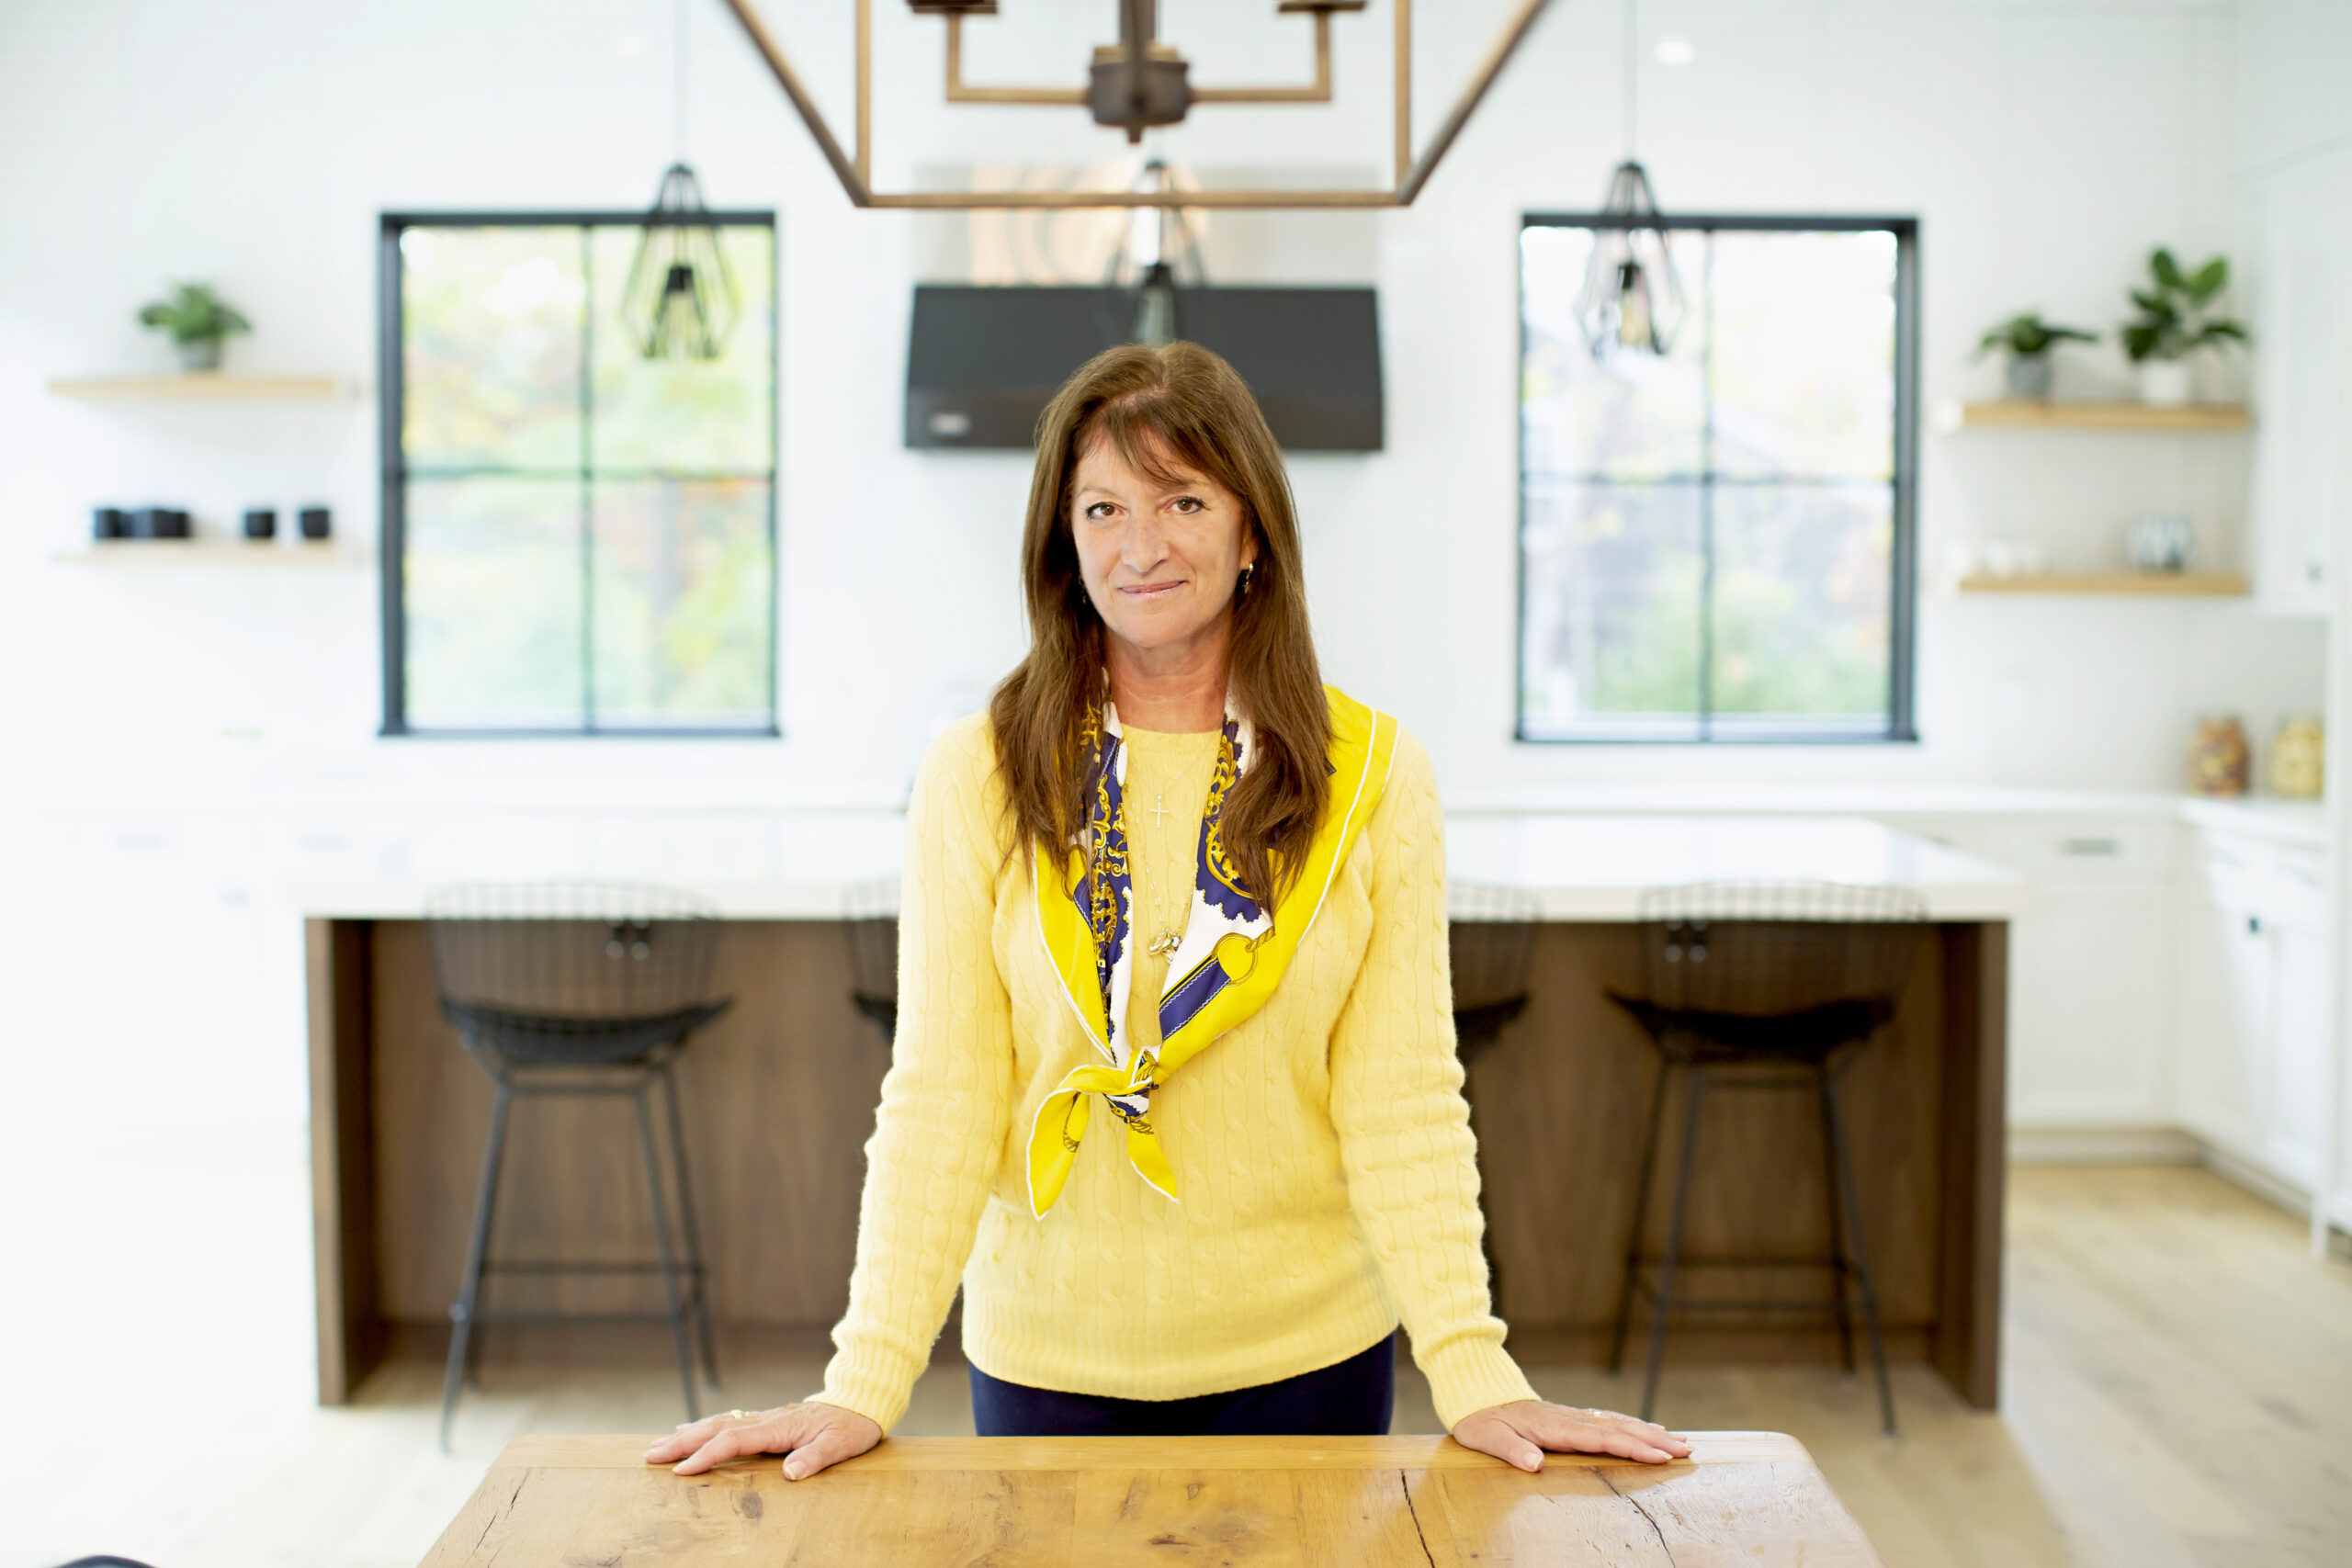 Judi Desiderio, the founder and CEO of Town & Country Real Estate